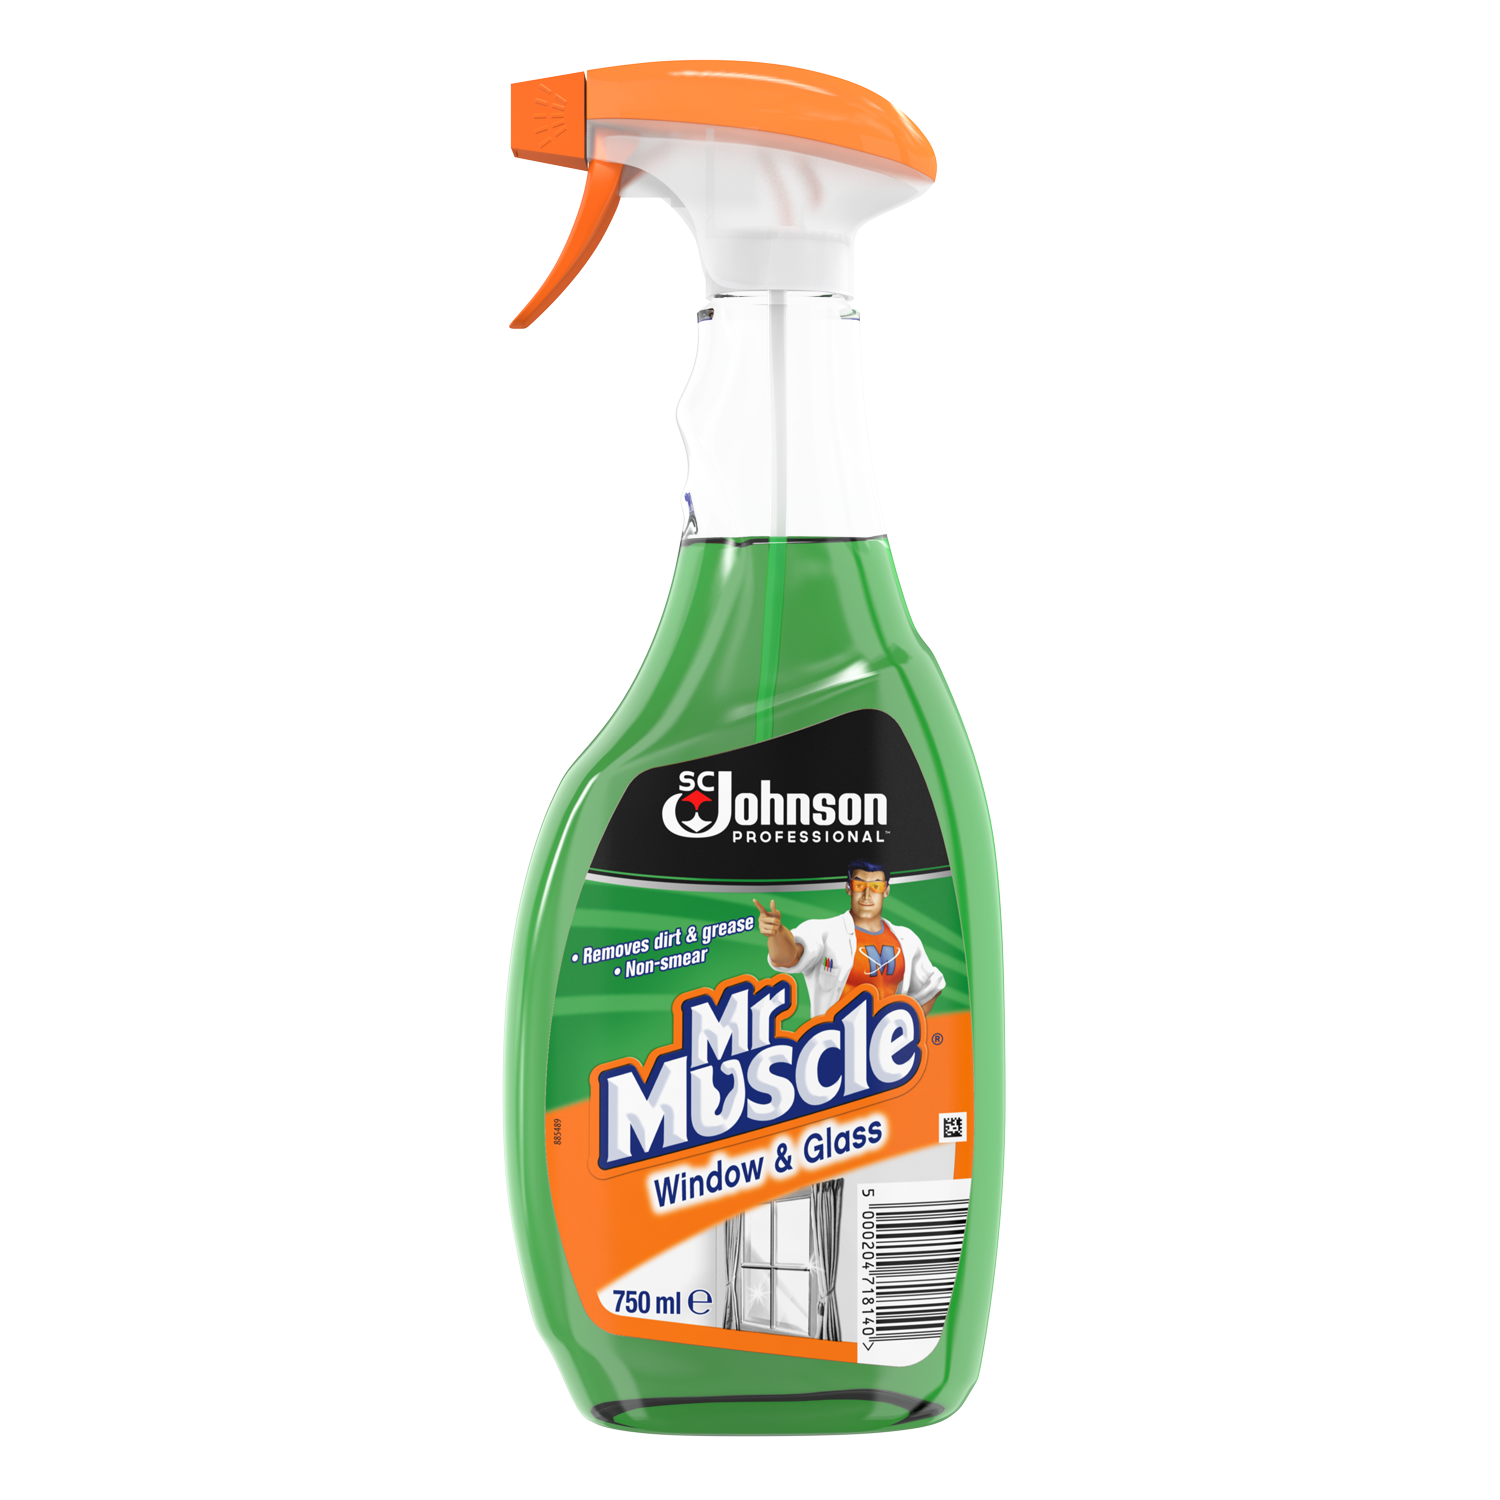 Mr Muscle window and glass cleaner